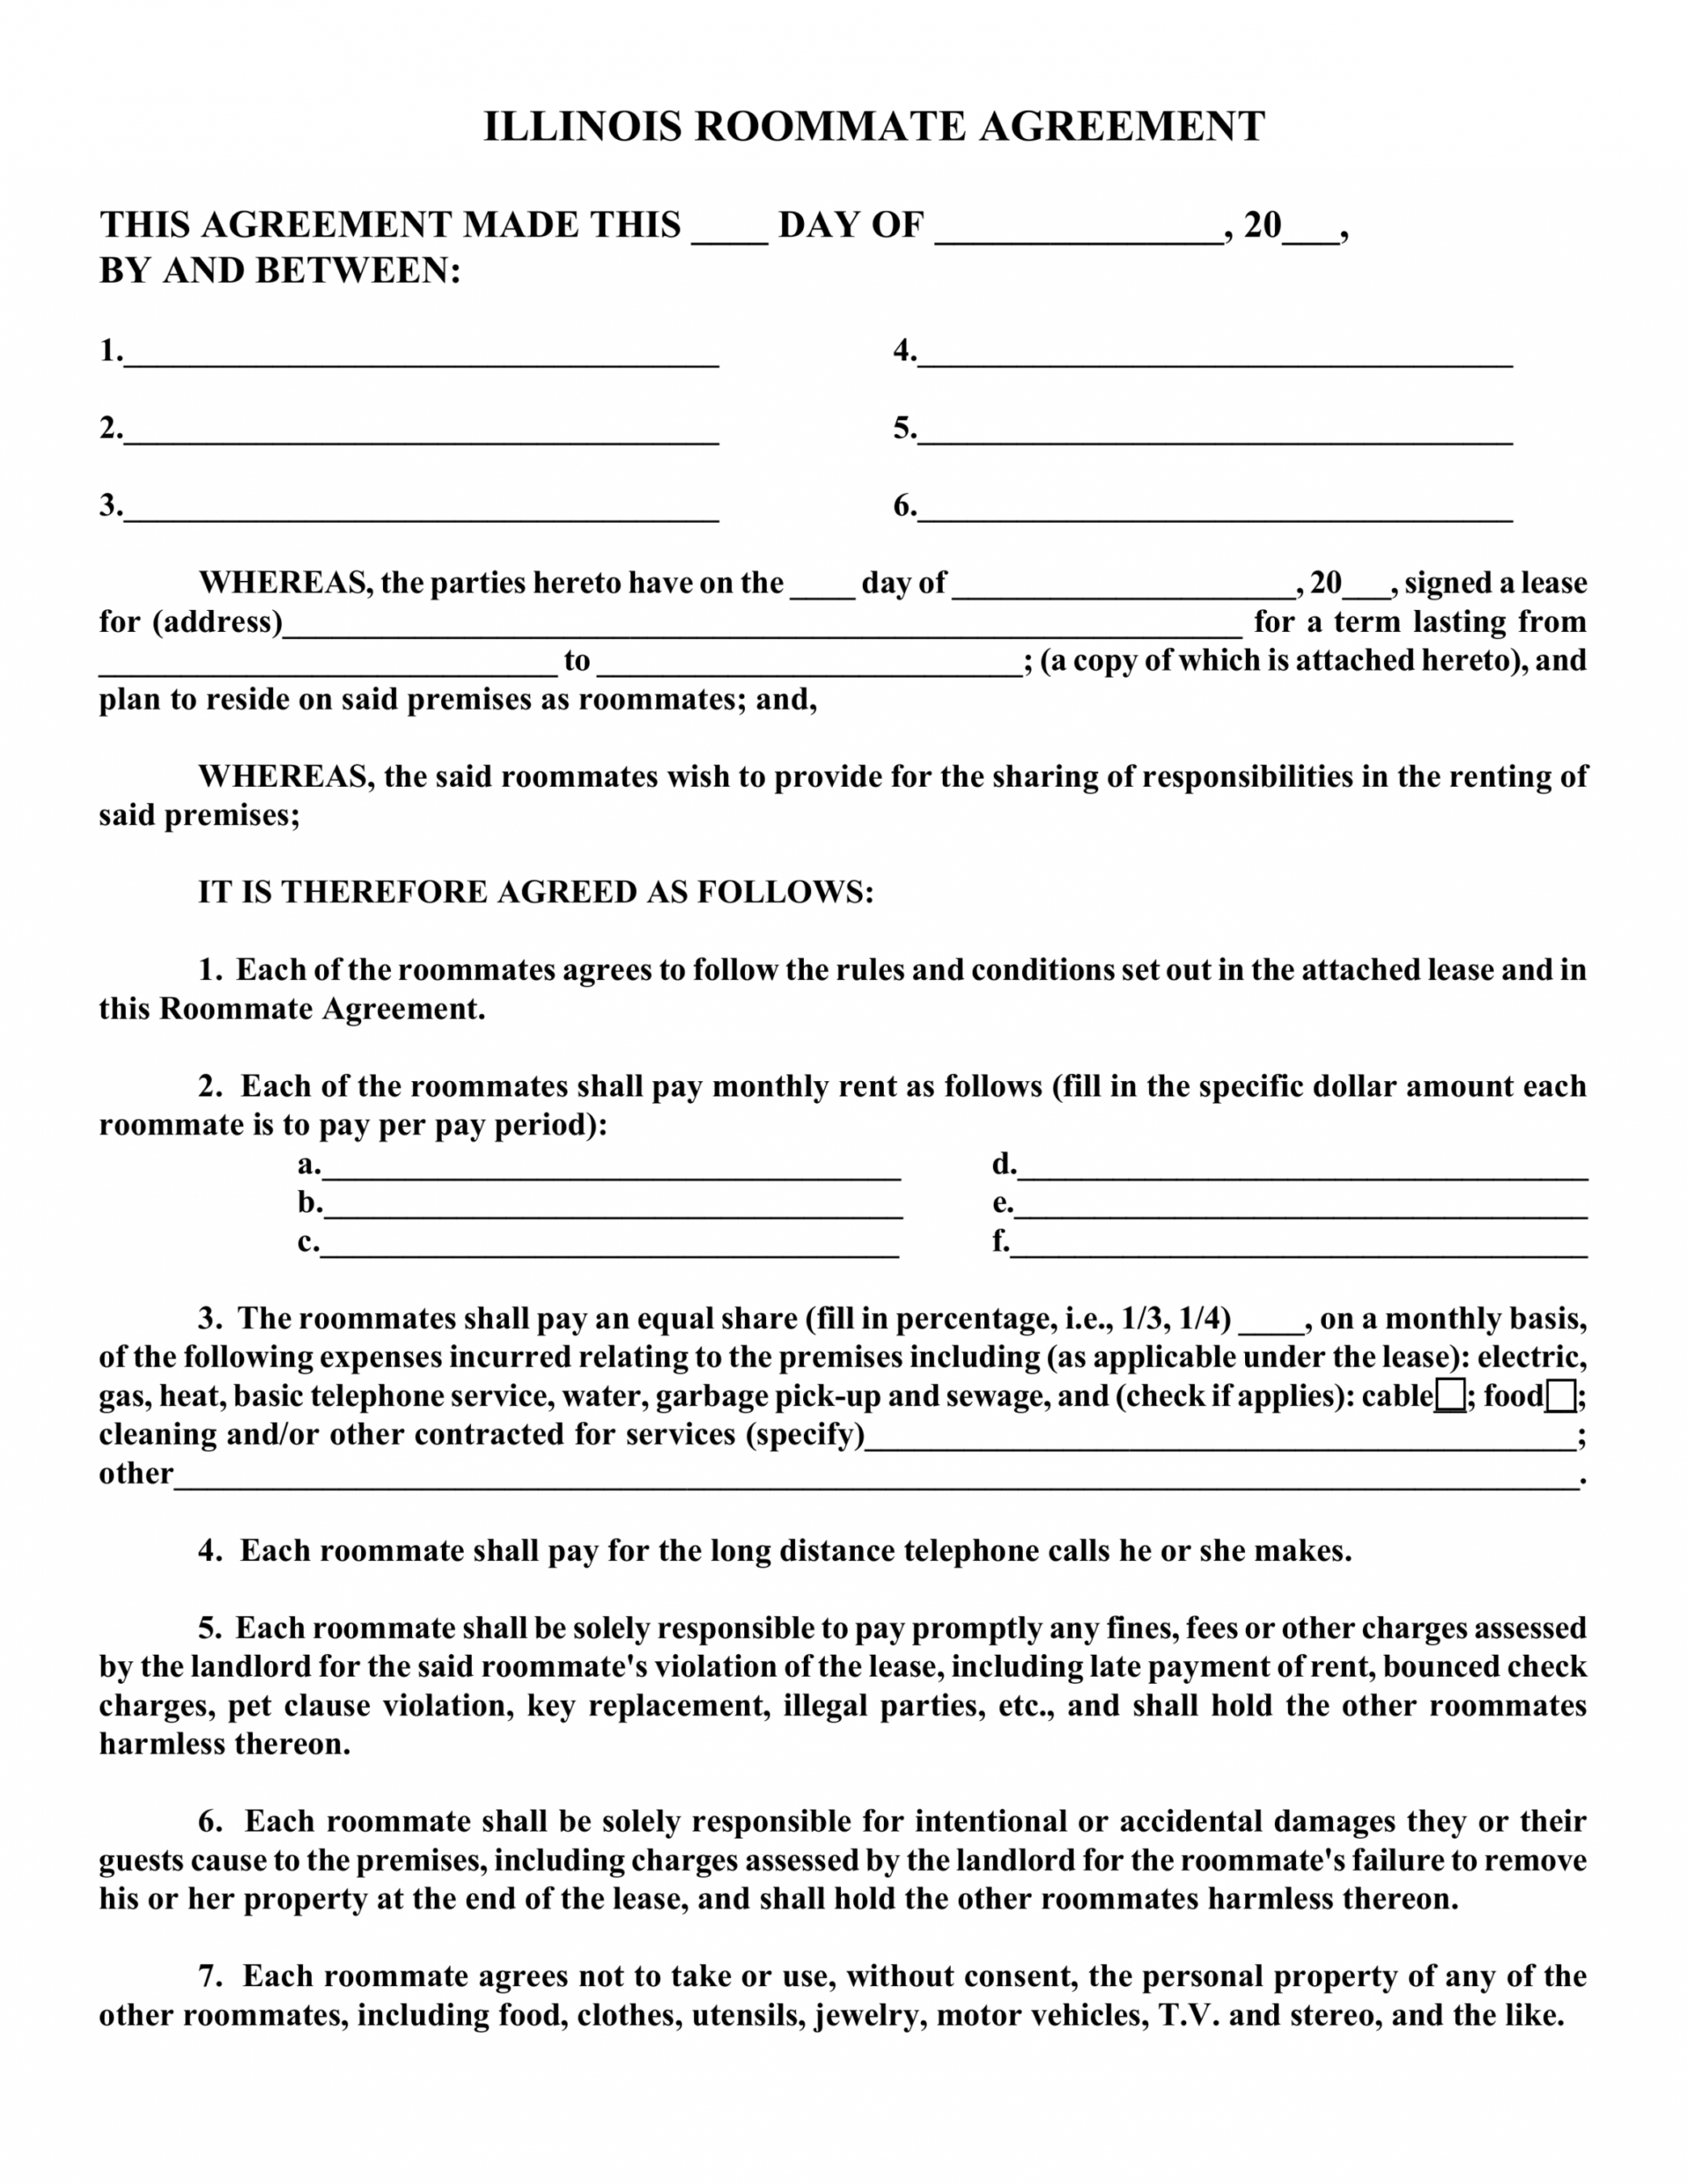 printable-room-and-board-agreement-form-printable-forms-free-online